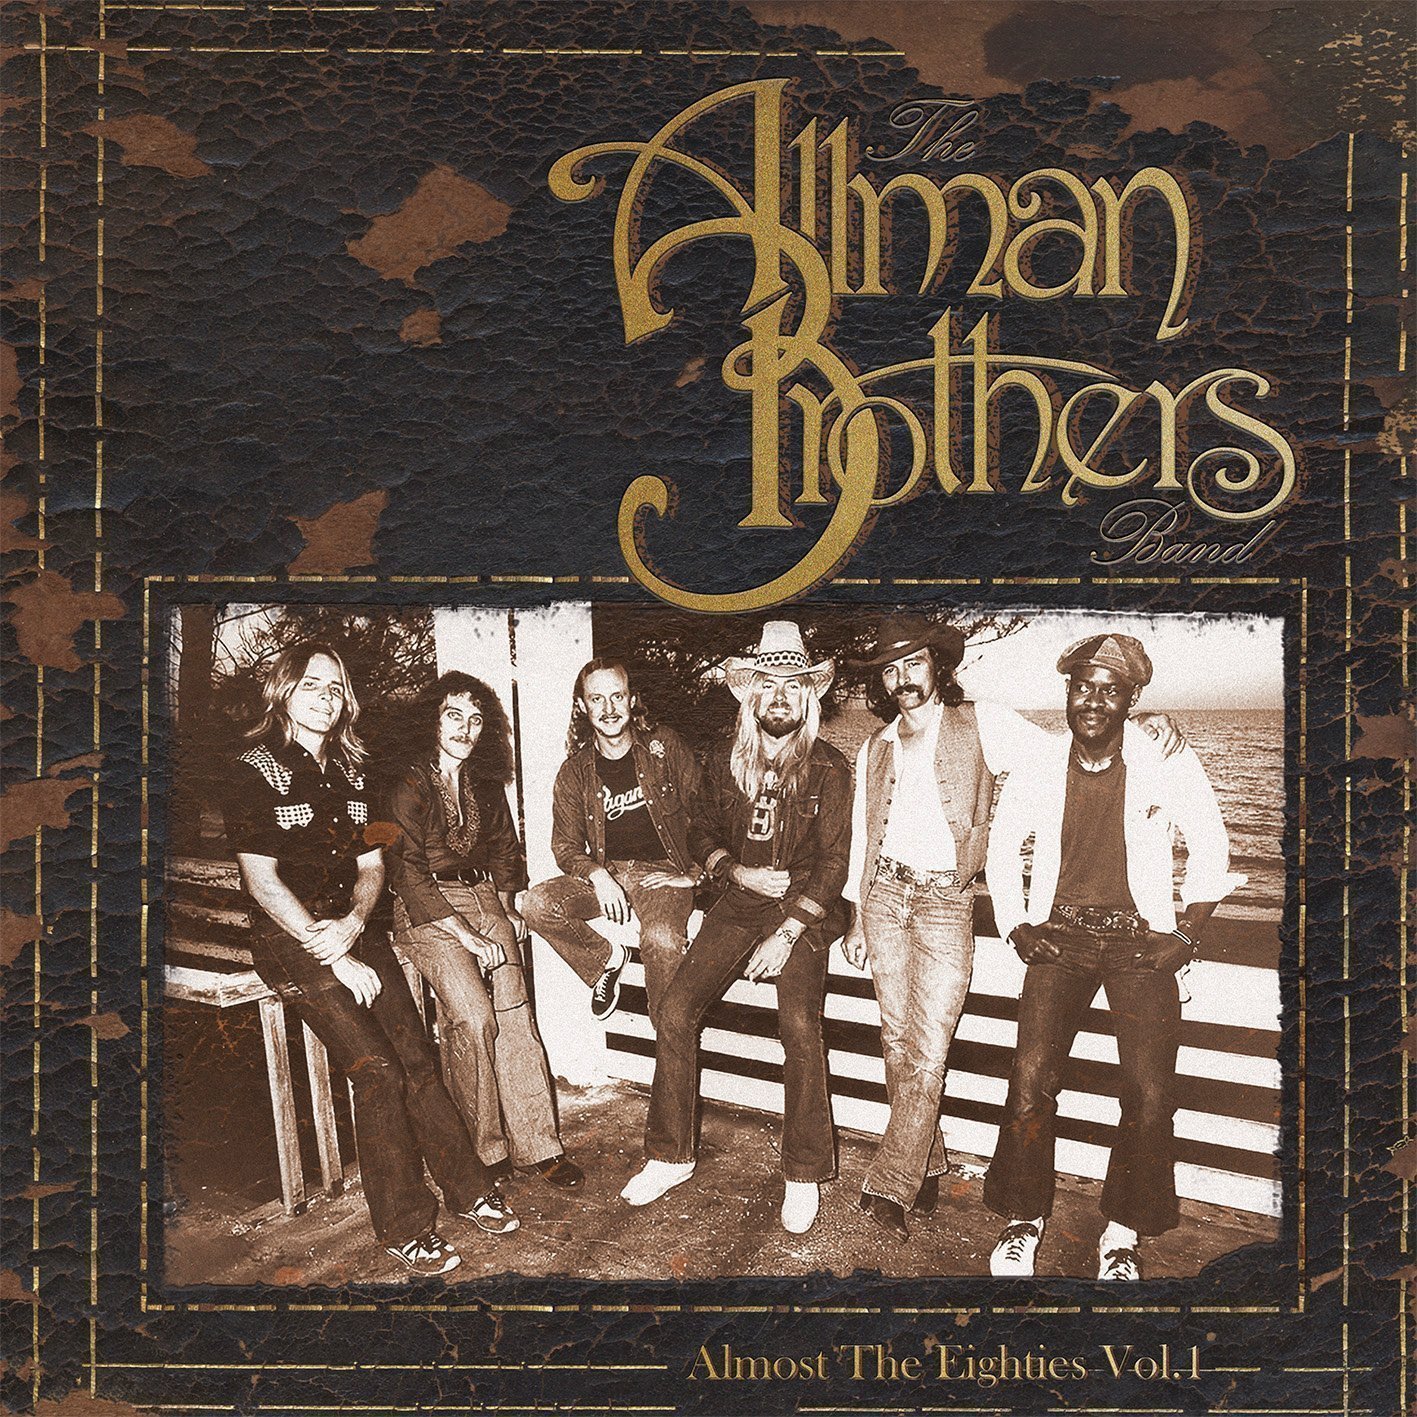 Vinyl Record The Allman Brothers Band - Almost The Eighties Vol. 1 (2 LP)